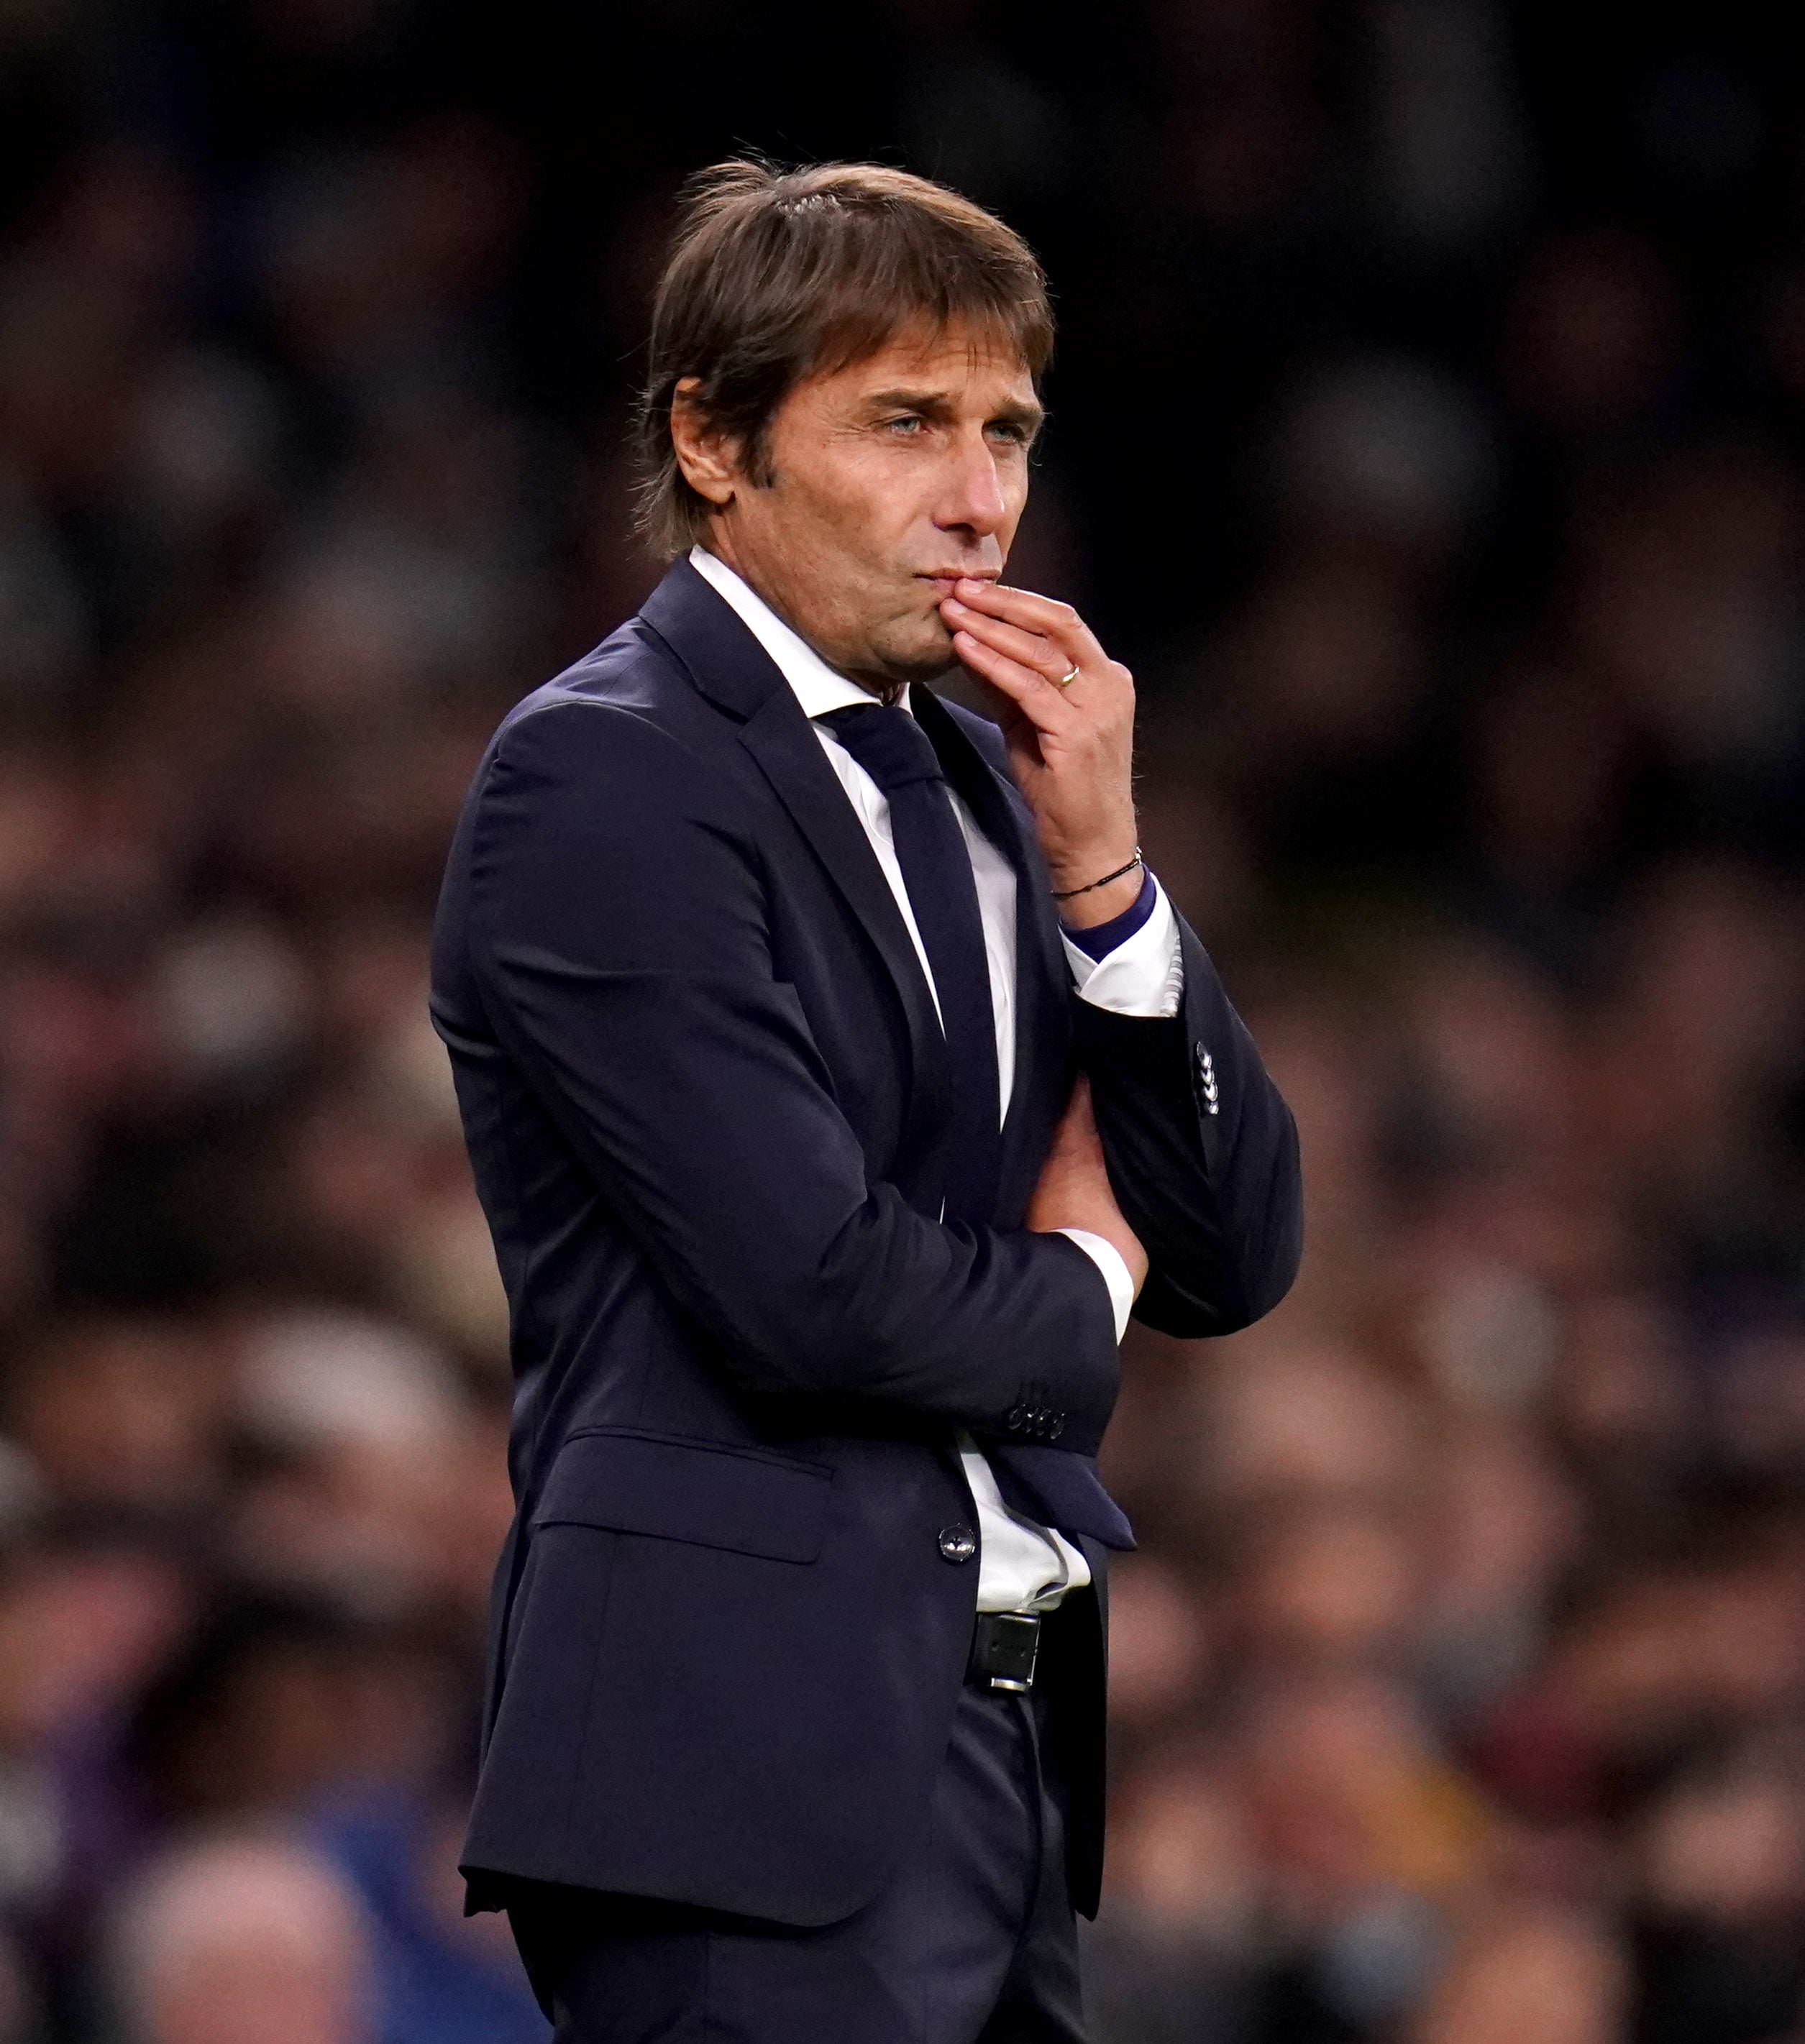 Lescott has been impressed with Antonio Conte’s work at Spurs (John Walton/PA)